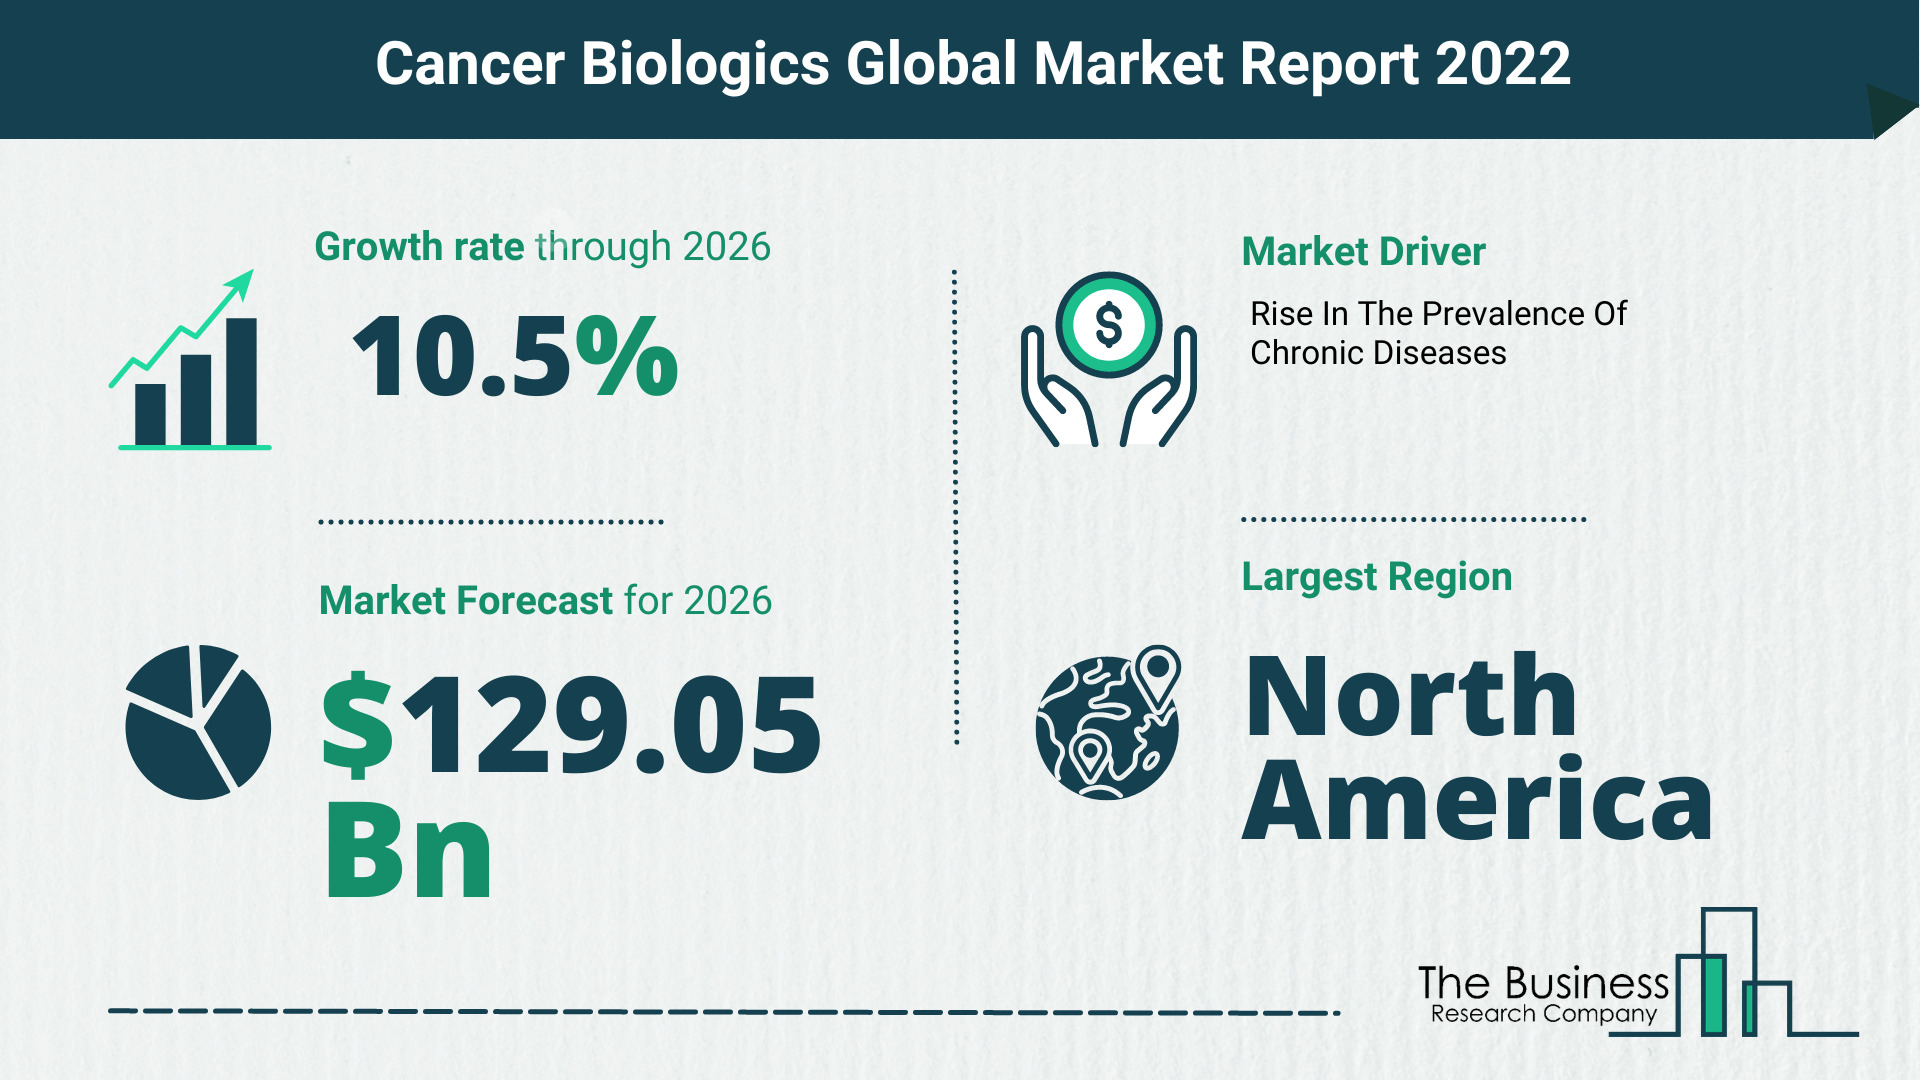 The Cancer Biologics Market Share, Market Size, And Growth Rate 2022